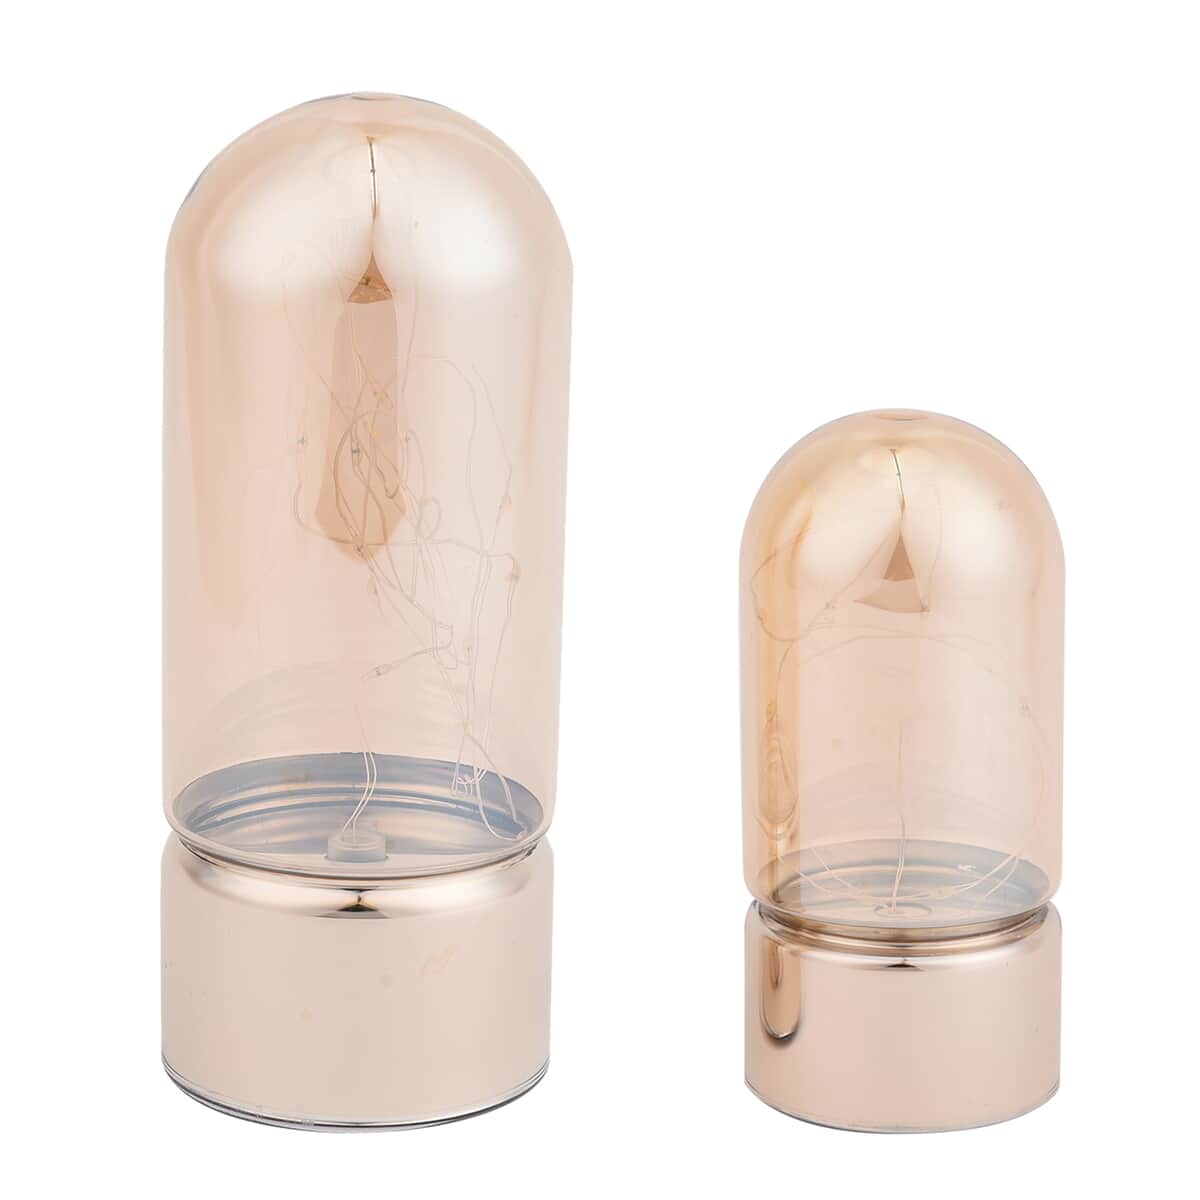 Set of 2 Warm Led Lantern - Smoke Gray & Amber (3 AAA battery not included) image number 0